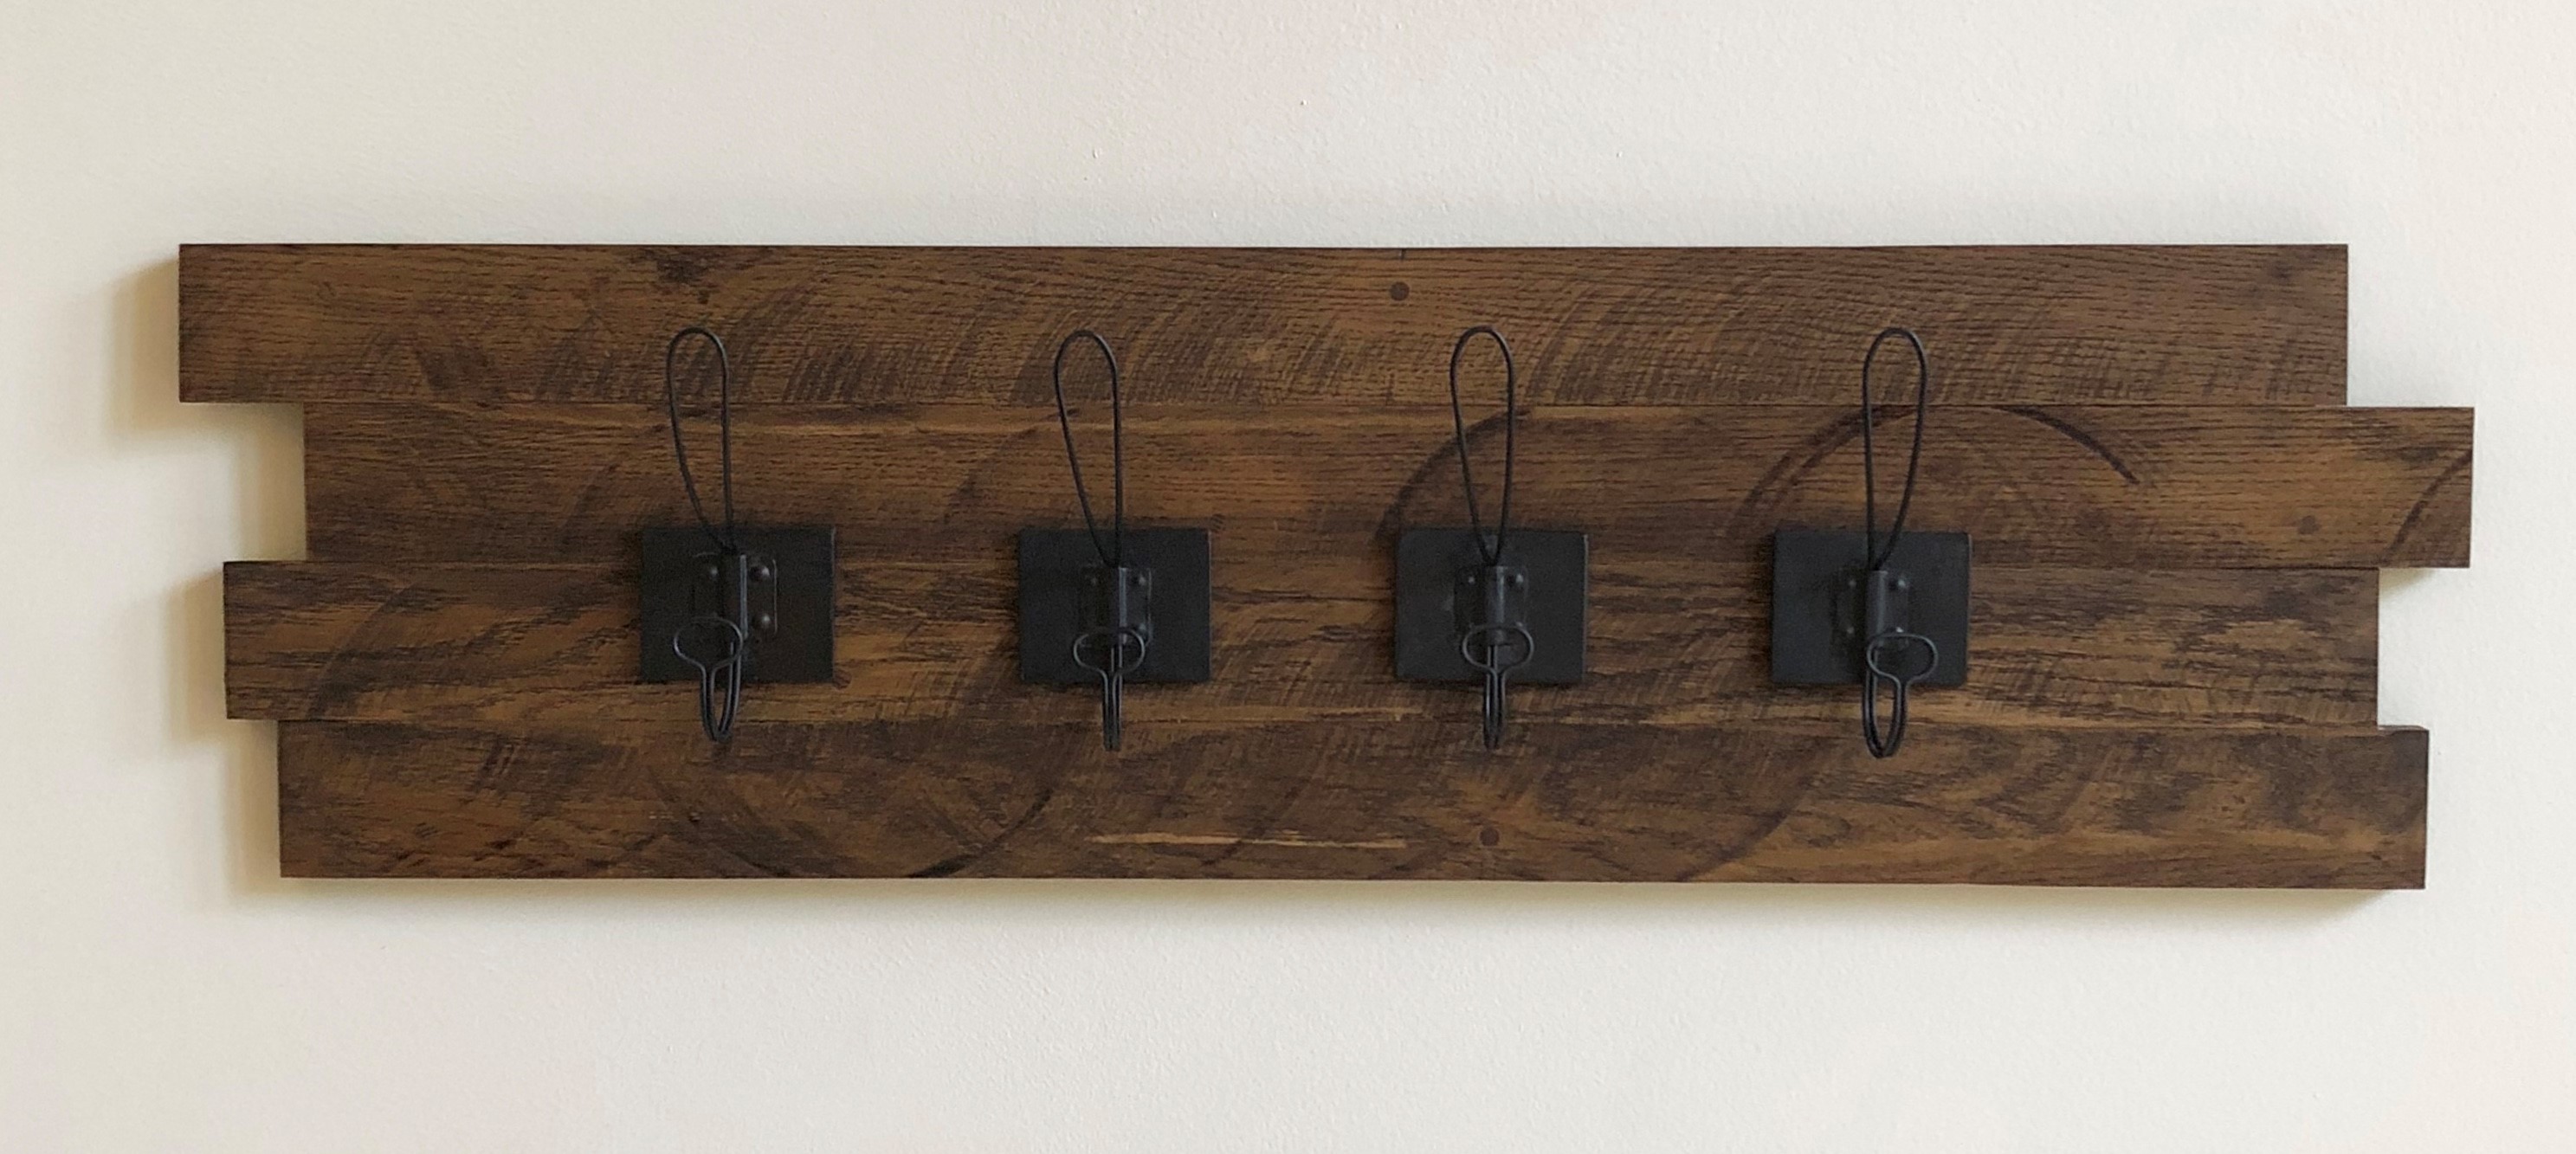 Handcrafted Haven: Artisanal Accessories For Rustic Spaces